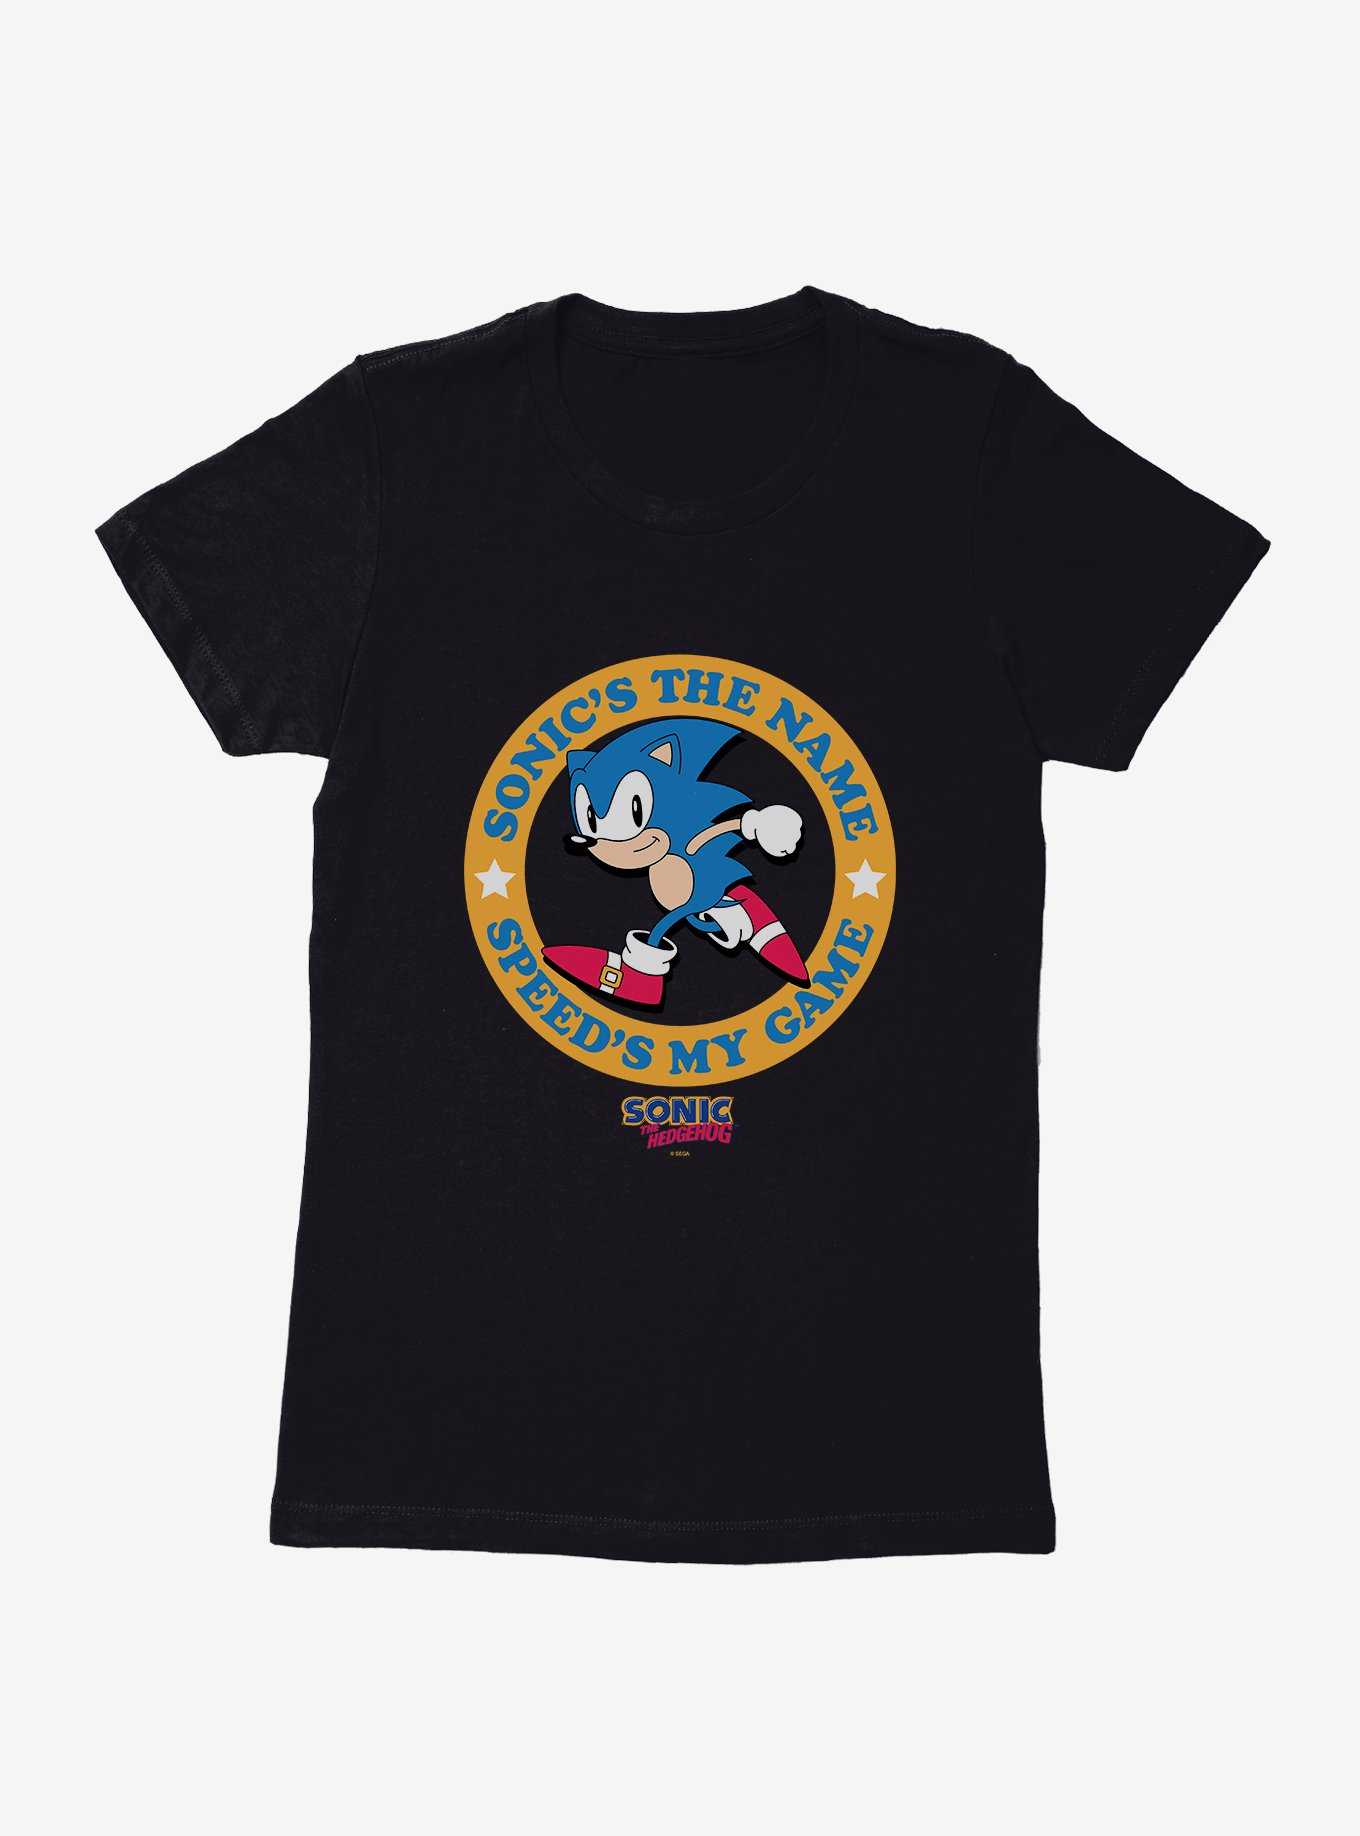 Sonic The Hedgehog Speed's My Game Womens T-Shirt, , hi-res